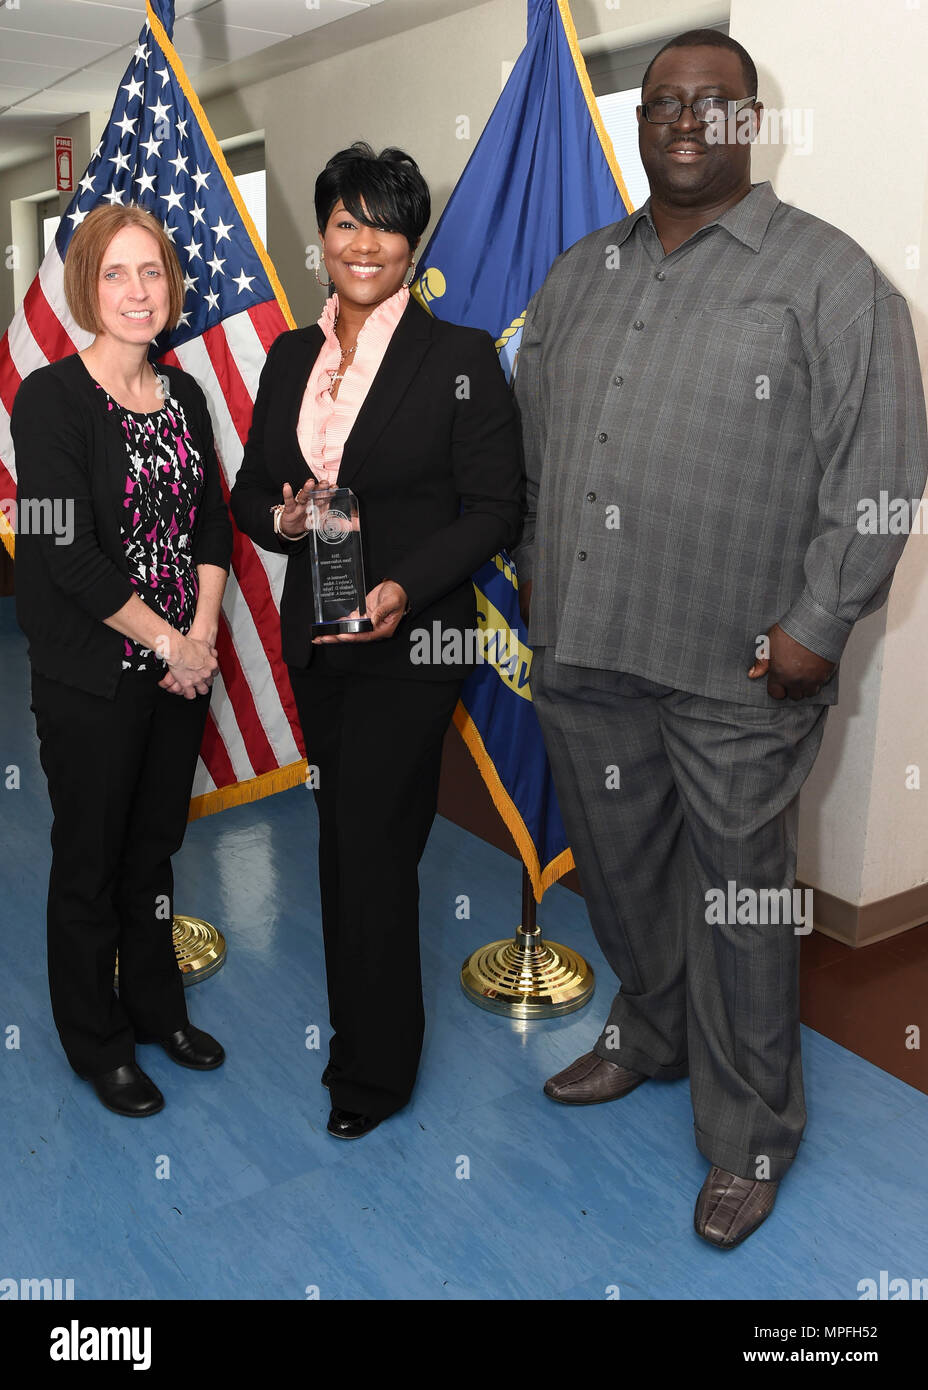 170228-N-PG340-005 PORTSMOUTH, Va. (Feb. 28, 2017) Navy Medicine East (NME) budget team with the Annual American Society of Military Comptrollers Team Achievement Award they received Feb. 23 (from left to right):  Carolyn Atkins, financial management analyst; Rashelle D. Taylor, budget department head; and Fitzgerald Wheeler, financial management analyst. NME is one of two regional commands that manage Navy Medicine's global health care network by overseeing the delivery of medical, dental and other health care services to approximately one million patients across almost 100 facilities across  Stock Photo